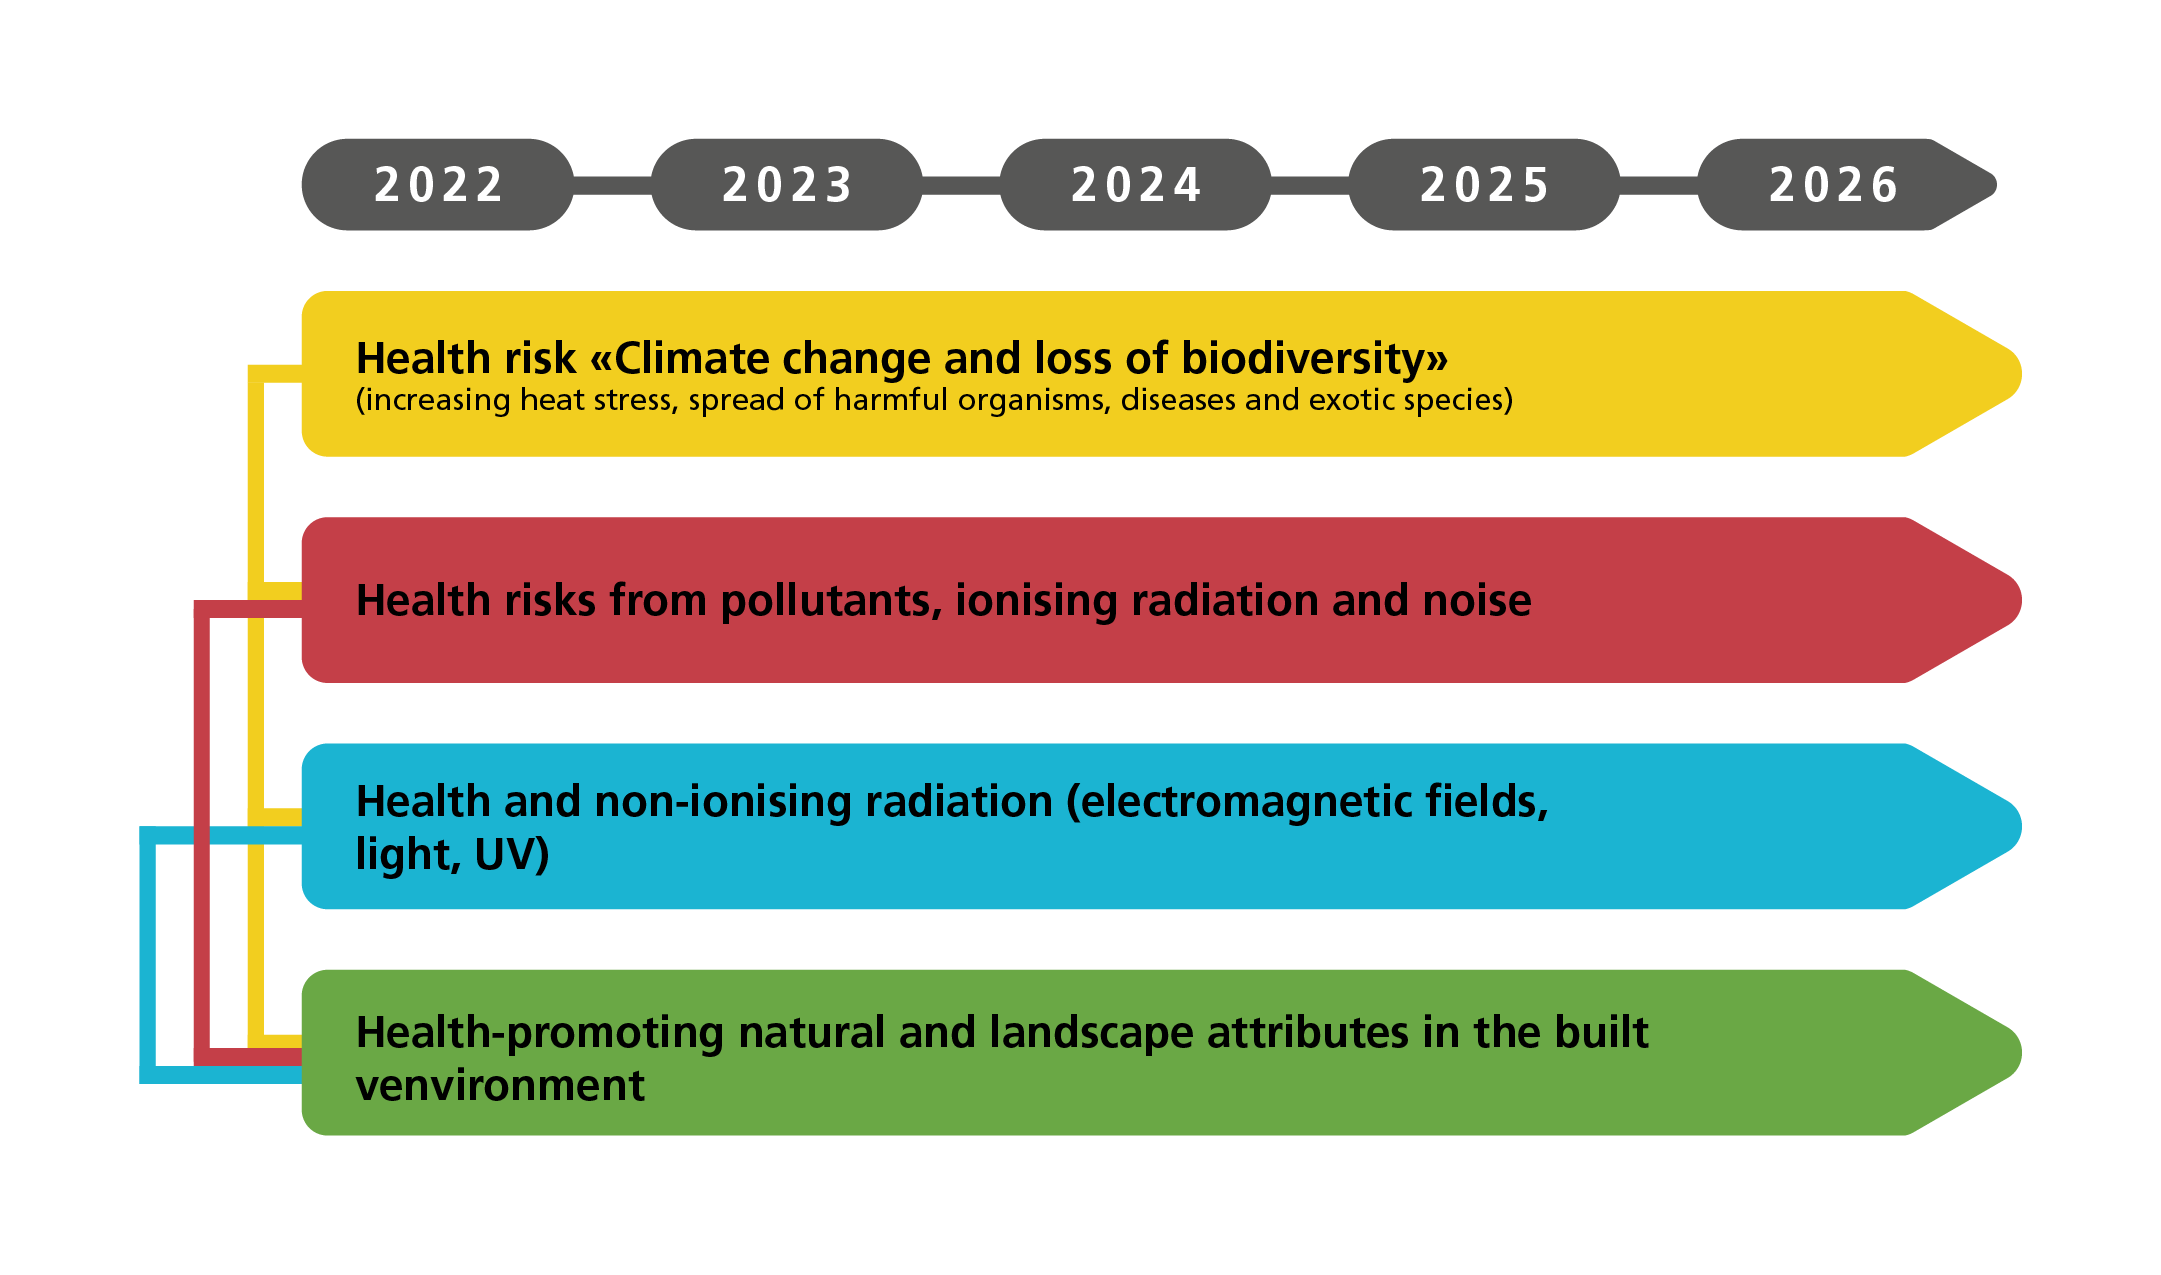 X-axis: years 2022, 2023, 2024, 2025, 2026; First bar, yellow: Health risk «Climate change and loss of biodiversity» (increasing heat stress, spread of harmful organisms, diseases and exotic species); Second bar, red: Health risks from pollutants, ionising radiation and noise; Third bar, blue: Health and non-ionising radiation (electromagnetic fields, light, UV); Fourth bar, green: Health-promoting natural and landscape attributes in the built environment. The yellow bar is connected to all three other bars. The red bar is connected to the green bar. The blue bar is connected to the green bar.